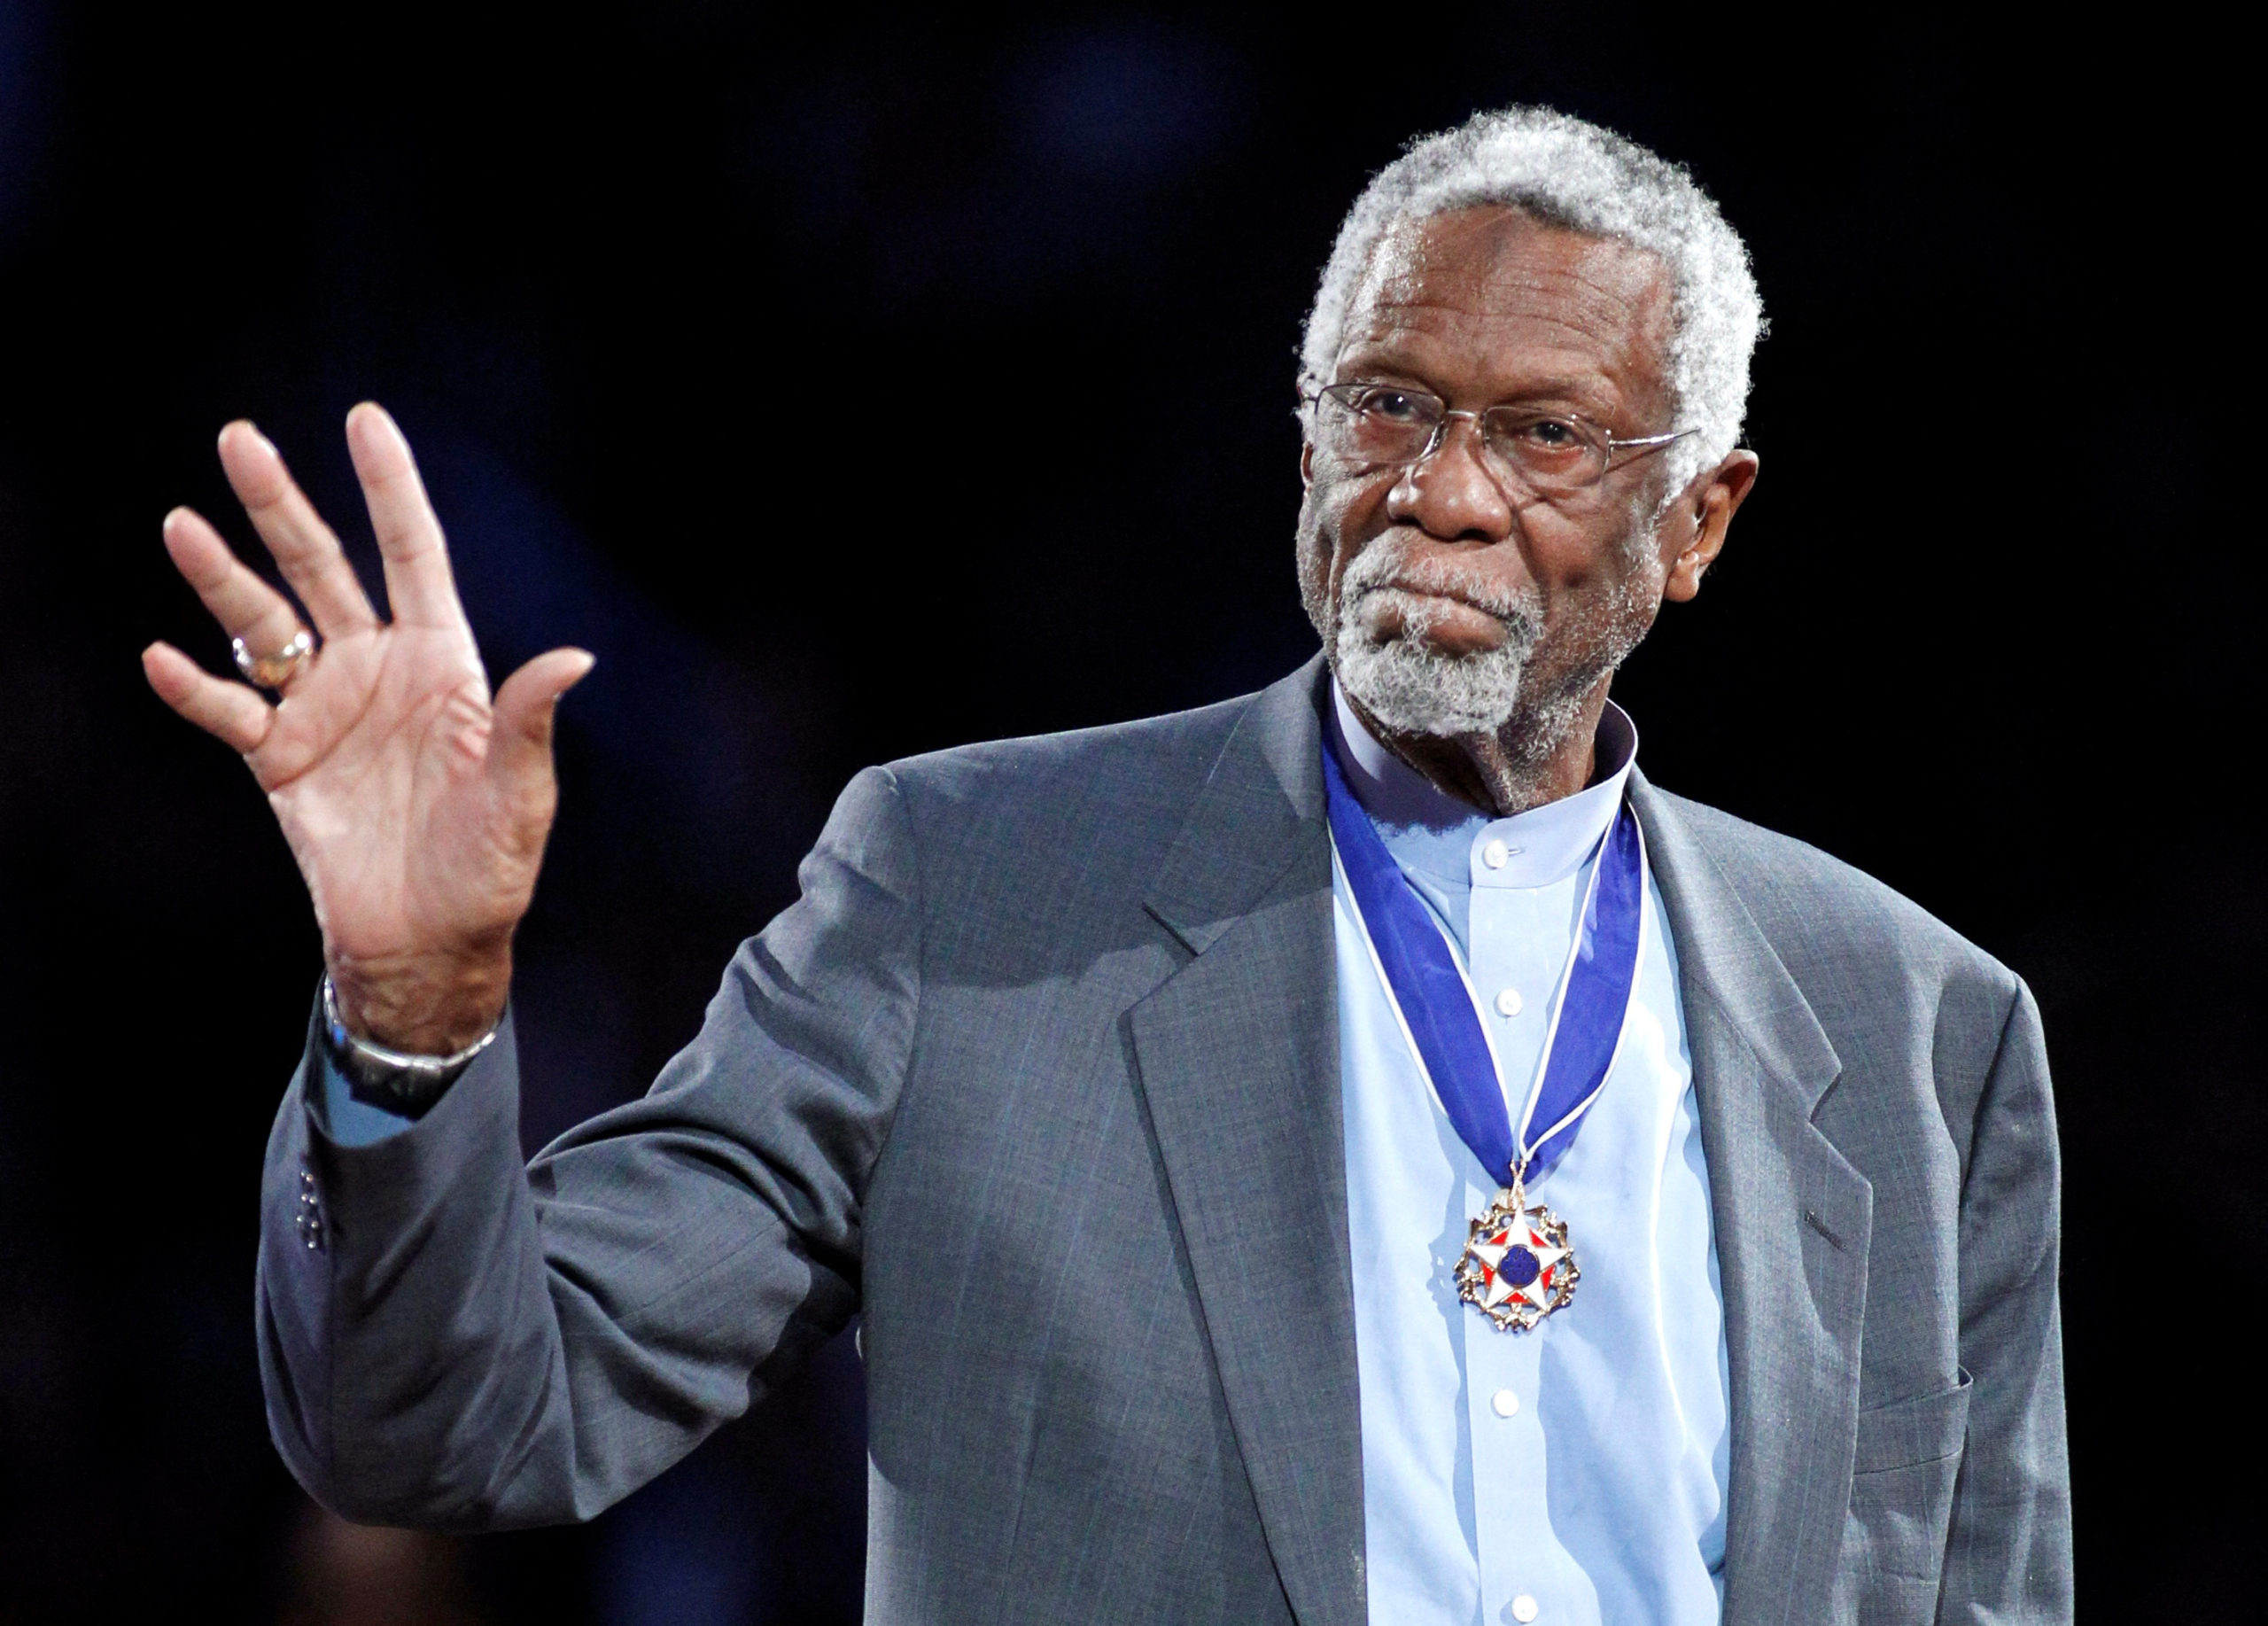 Boston Celtics' legend Bill Russell stands with his Presidential Medal of Freedom during the NBA All-Star basketball game in Los Angeles, February 20, 2011. REUTERS/Danny Moloshok/File Photo